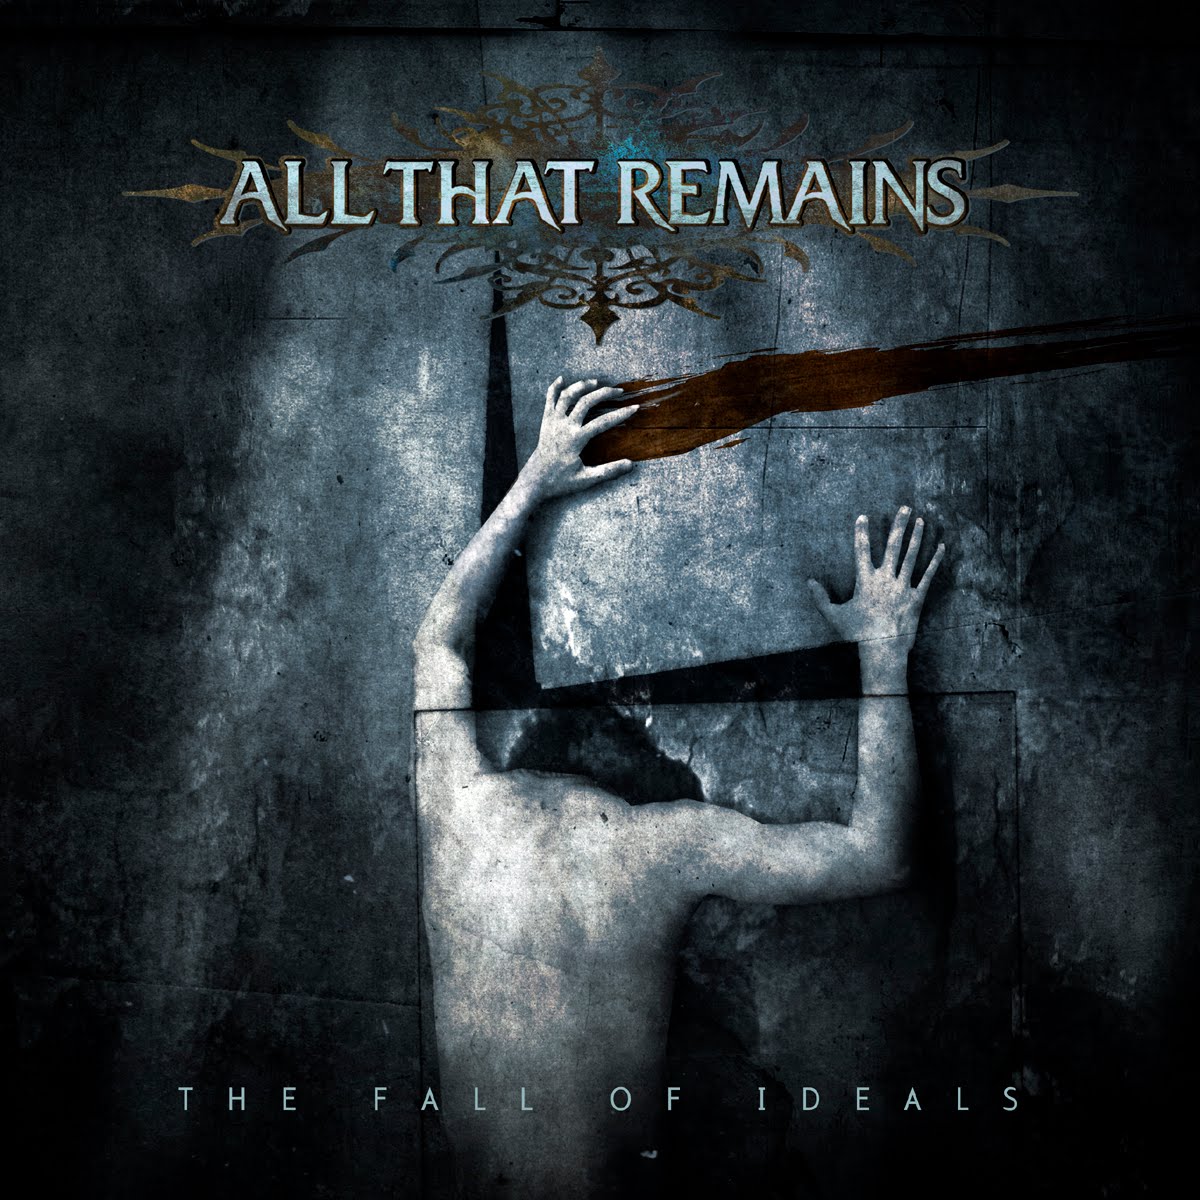 all that remains full album fall of ideals torrent